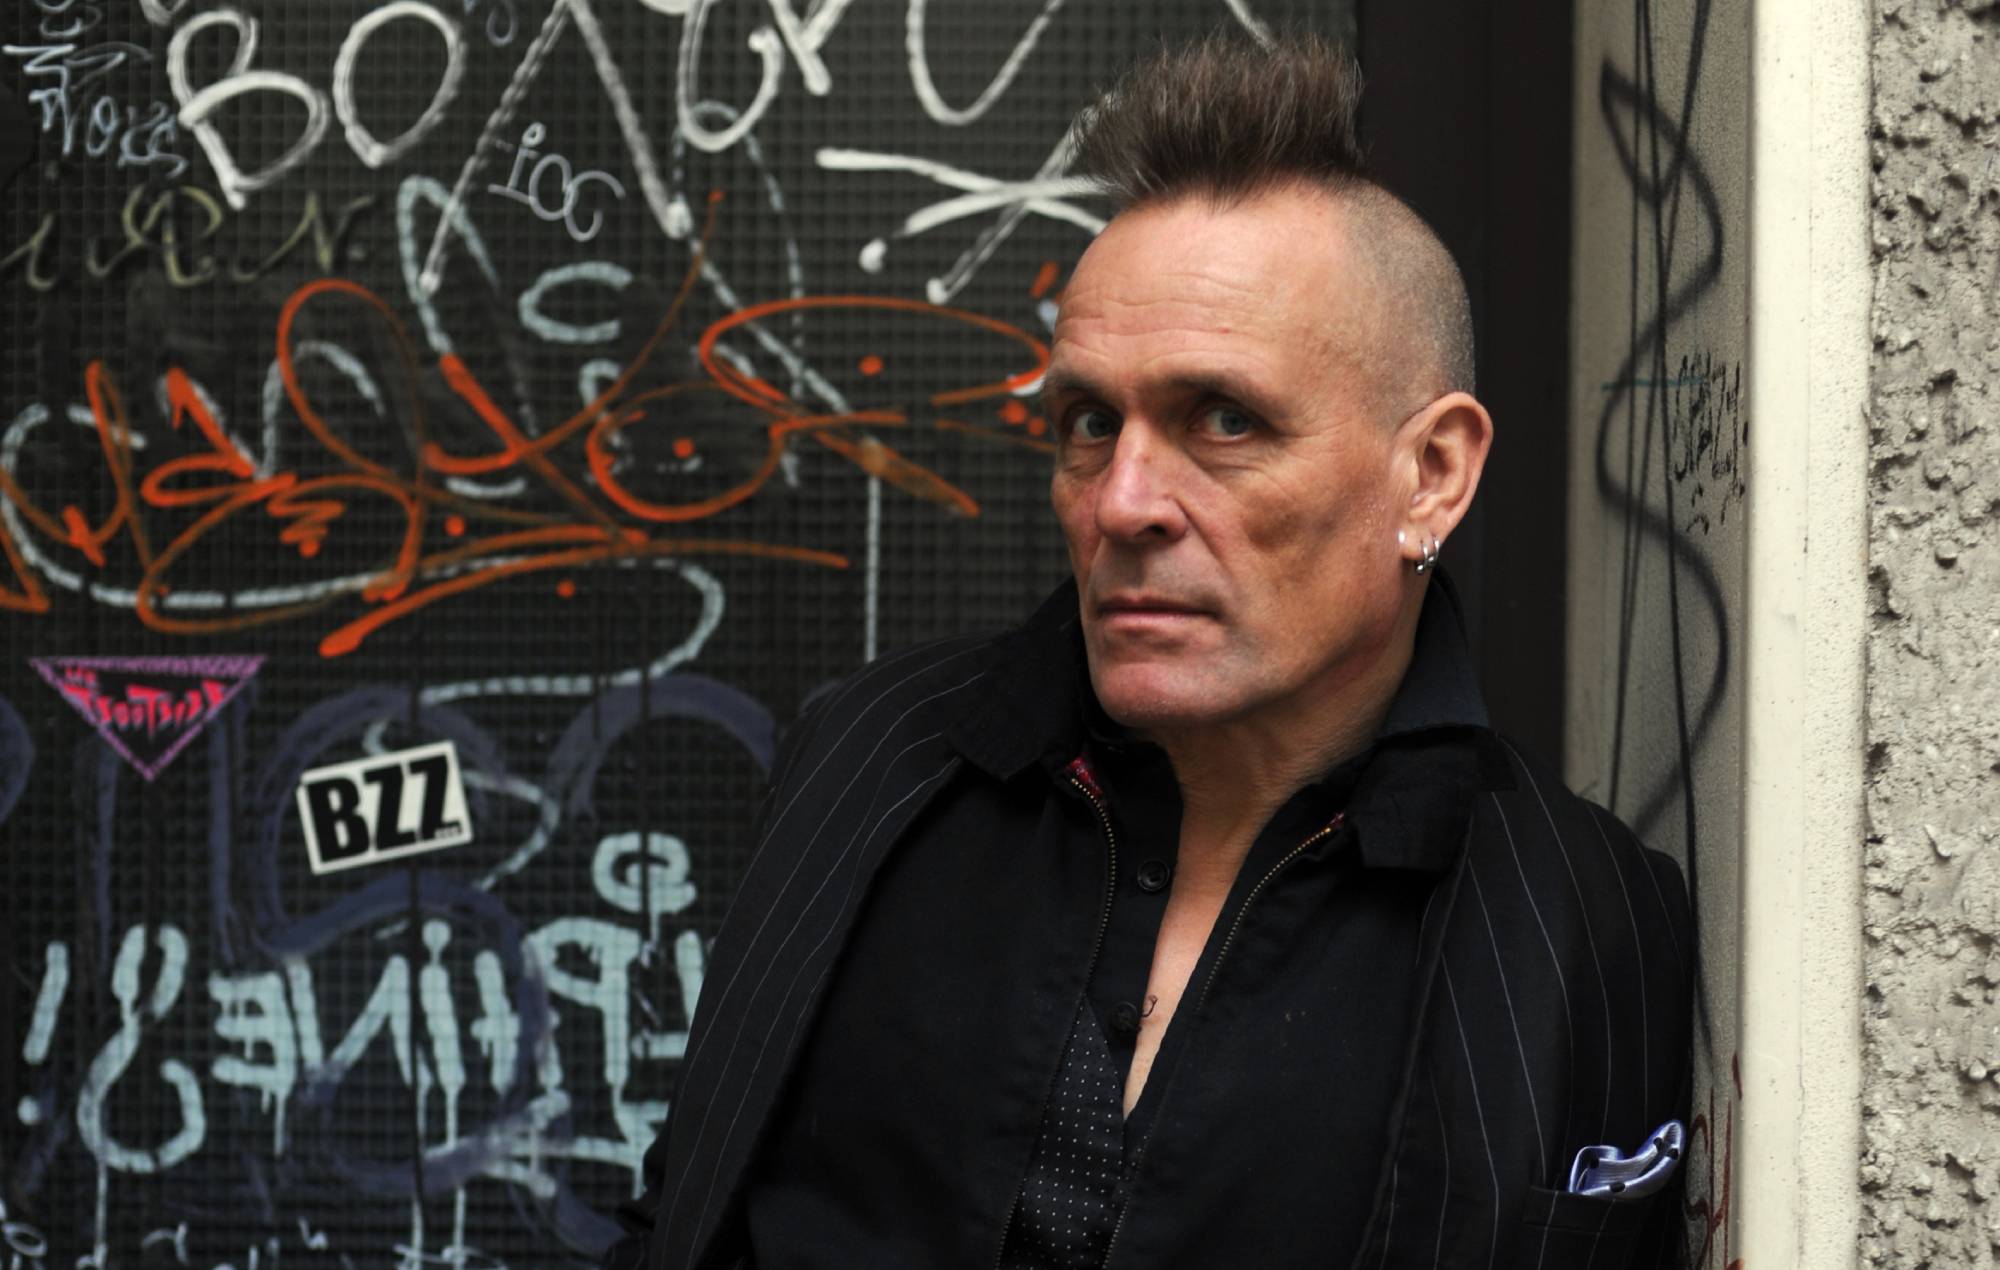 John Robb on discovering Nirvana, that Oasis fight, and the health of new music